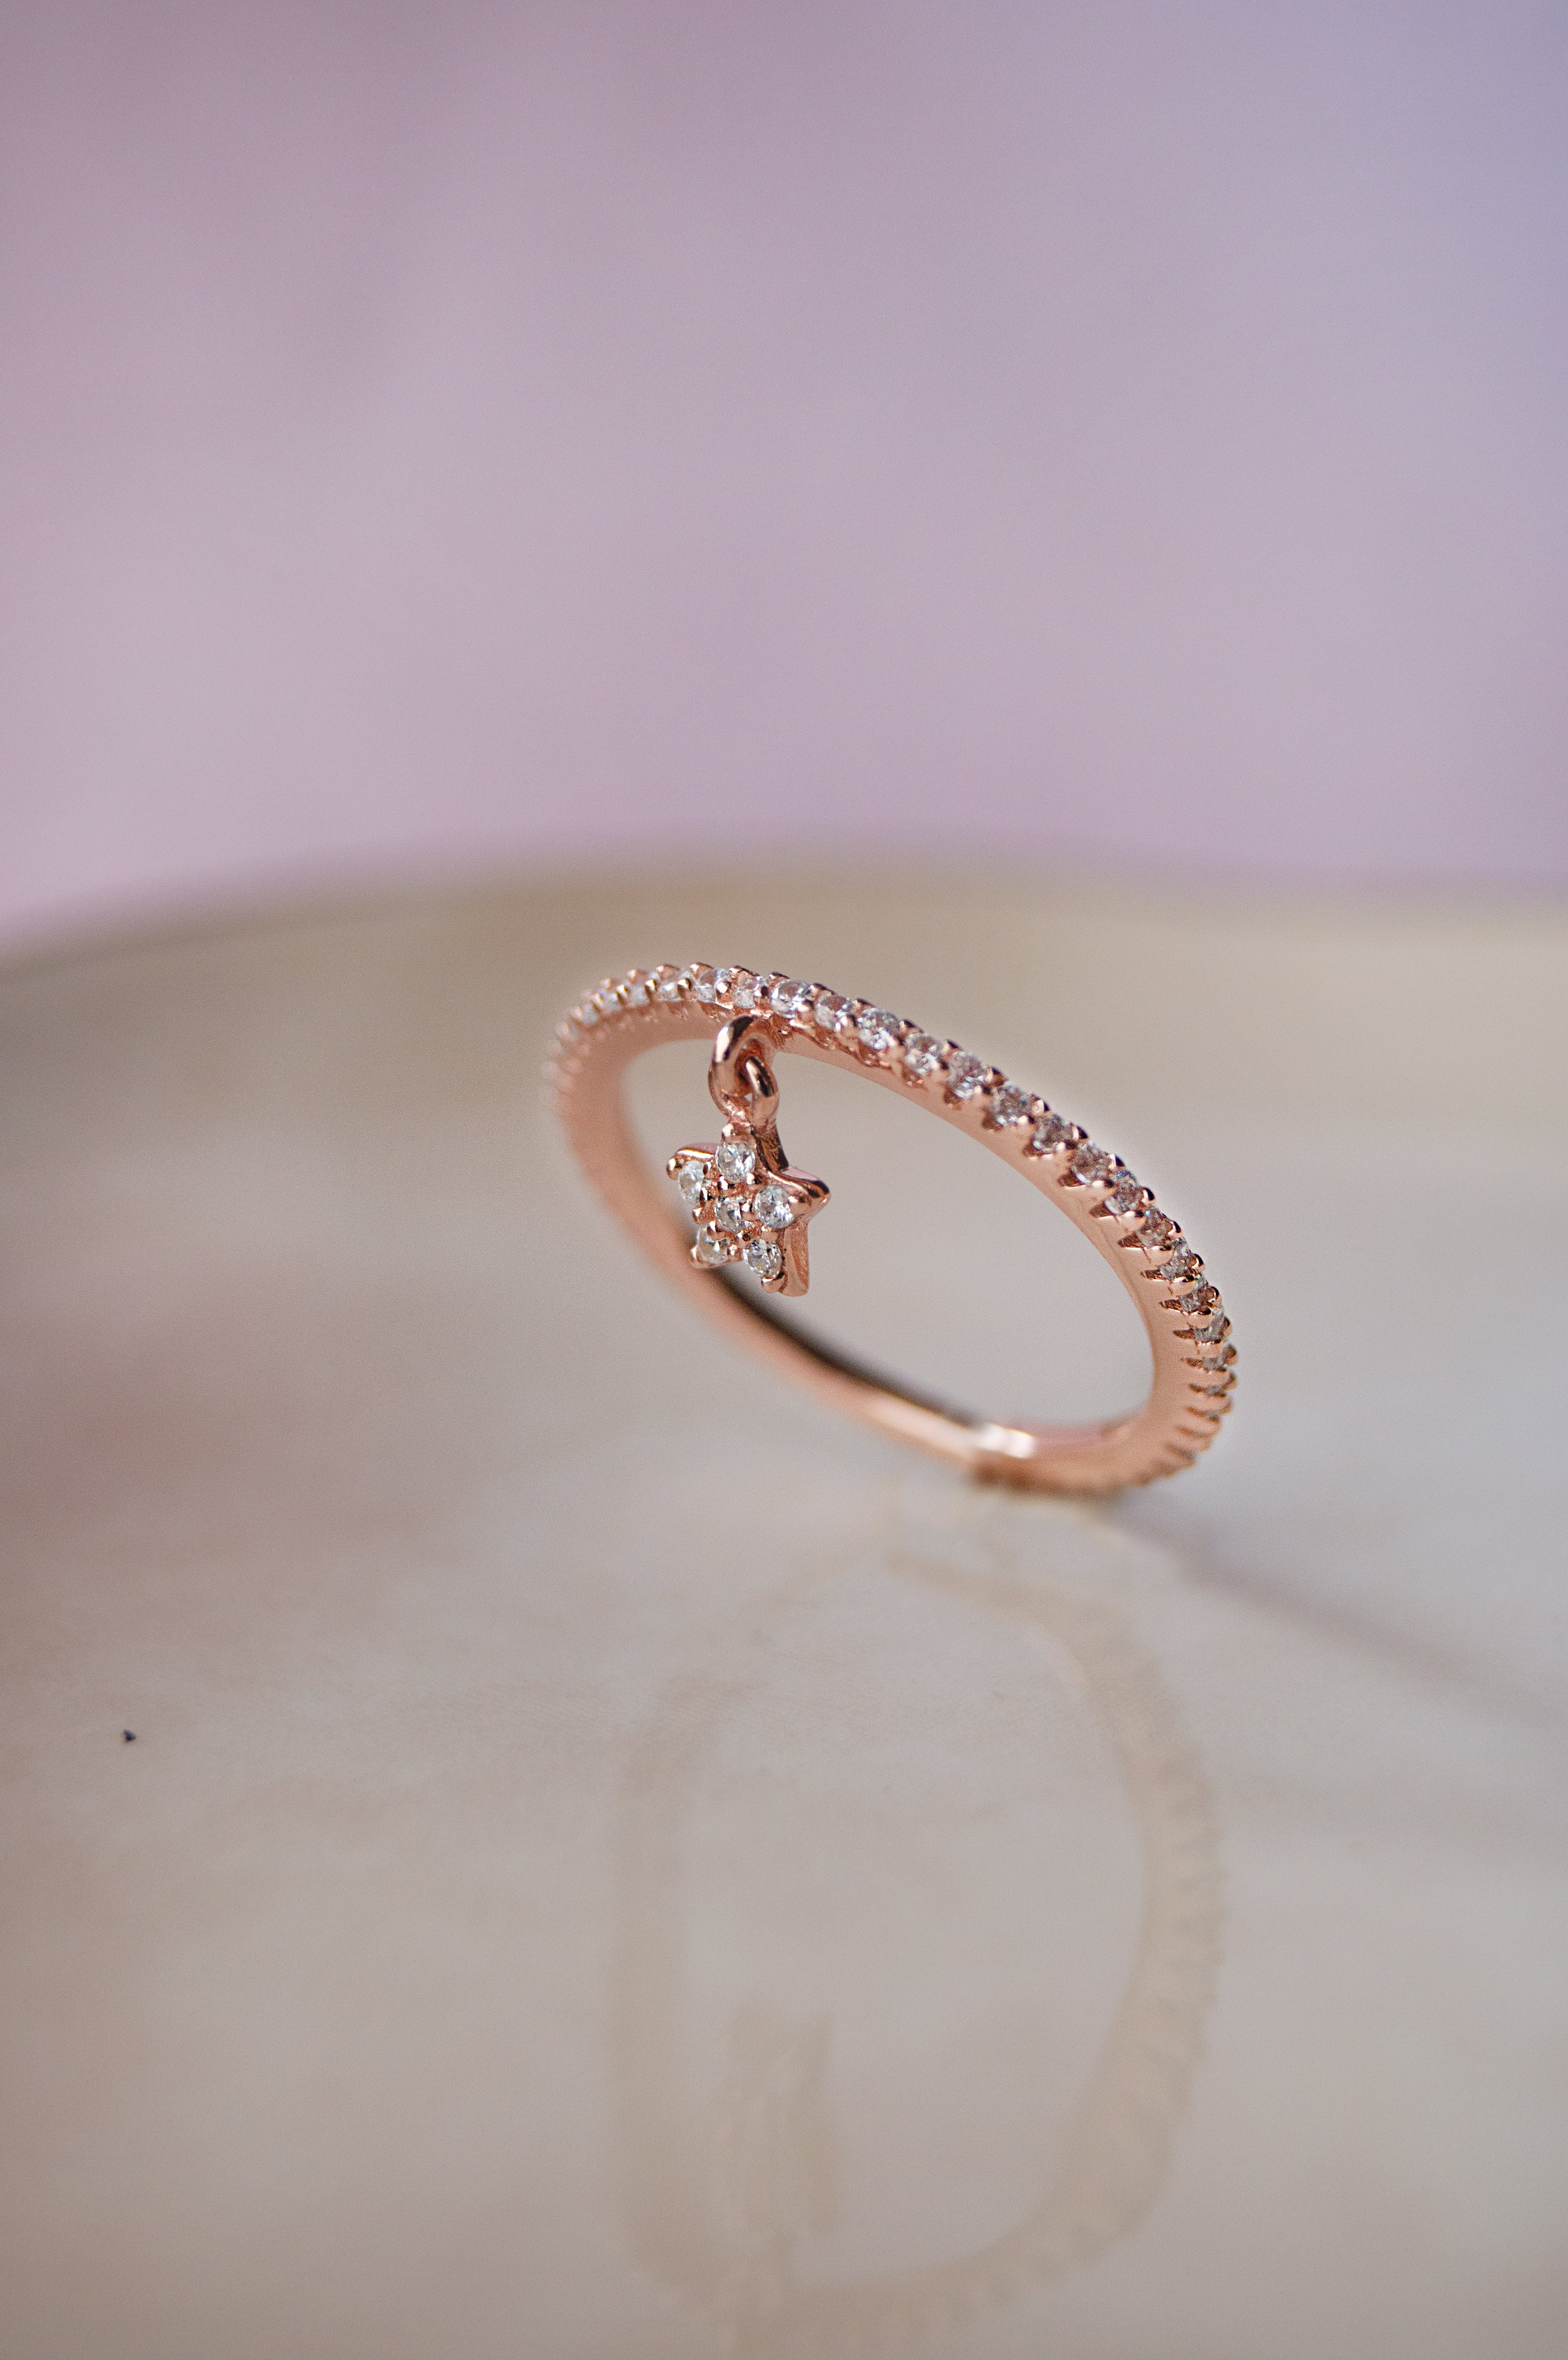 Rose Gold Engagement Rings - Rose means Love!